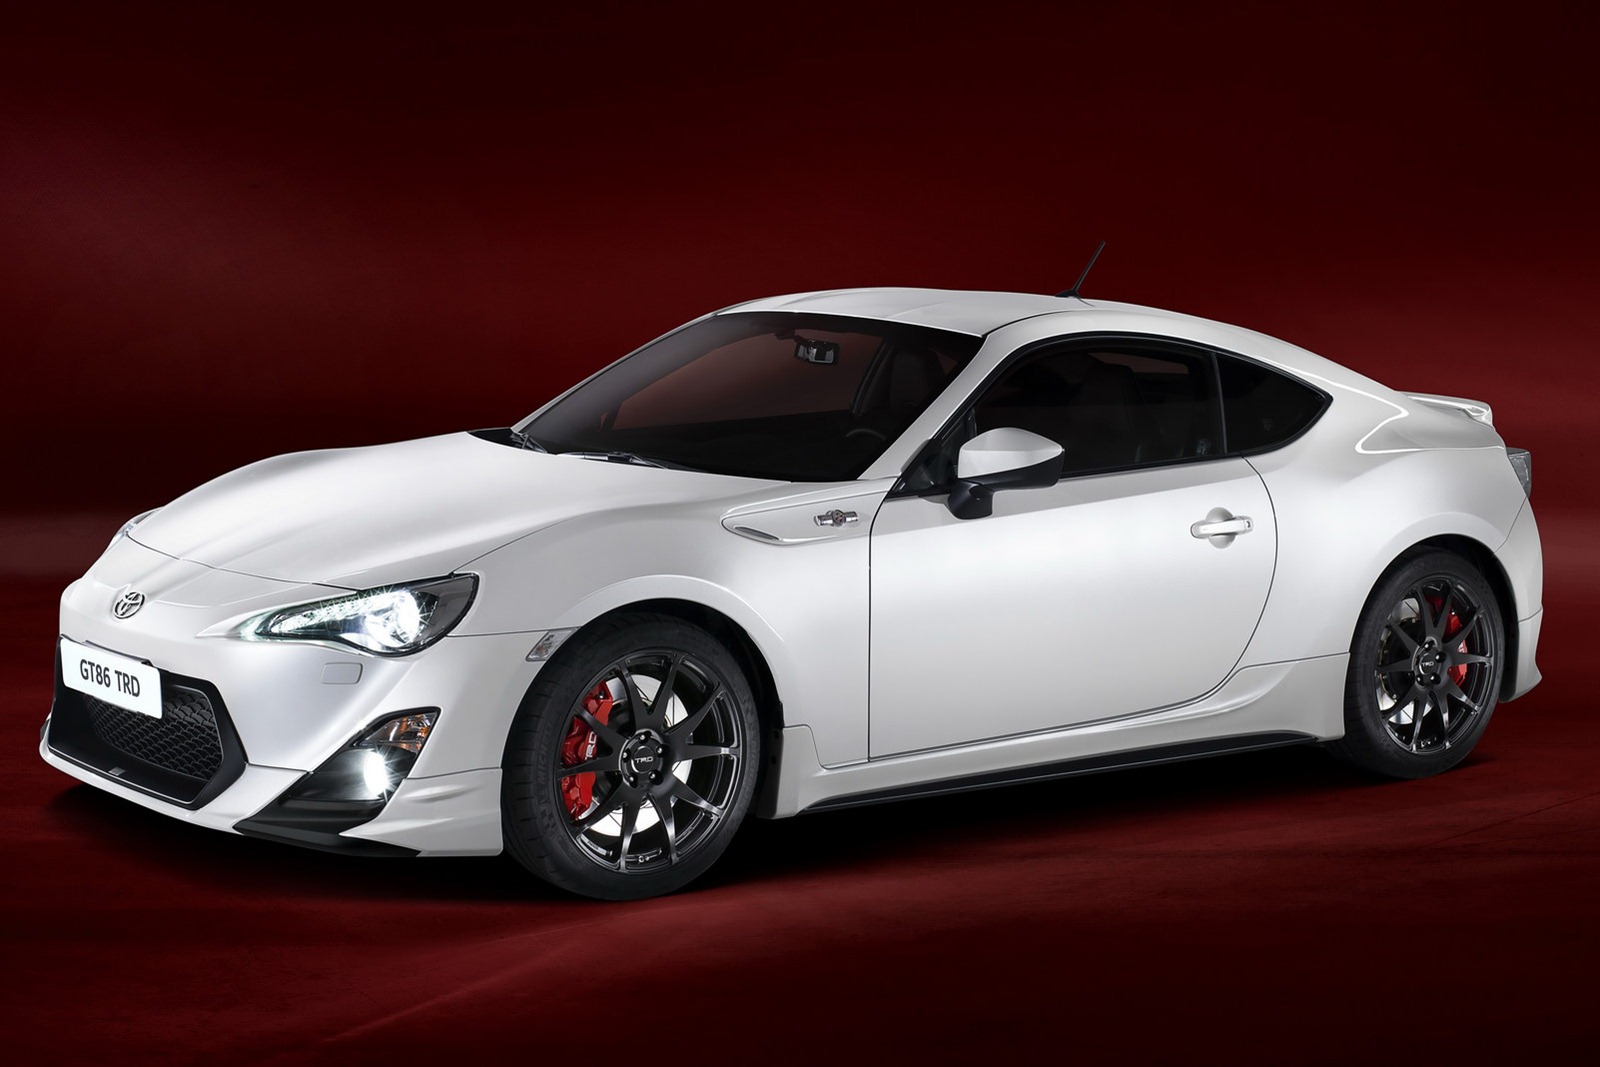 TRD Performance Line accessories for the Toyota 86